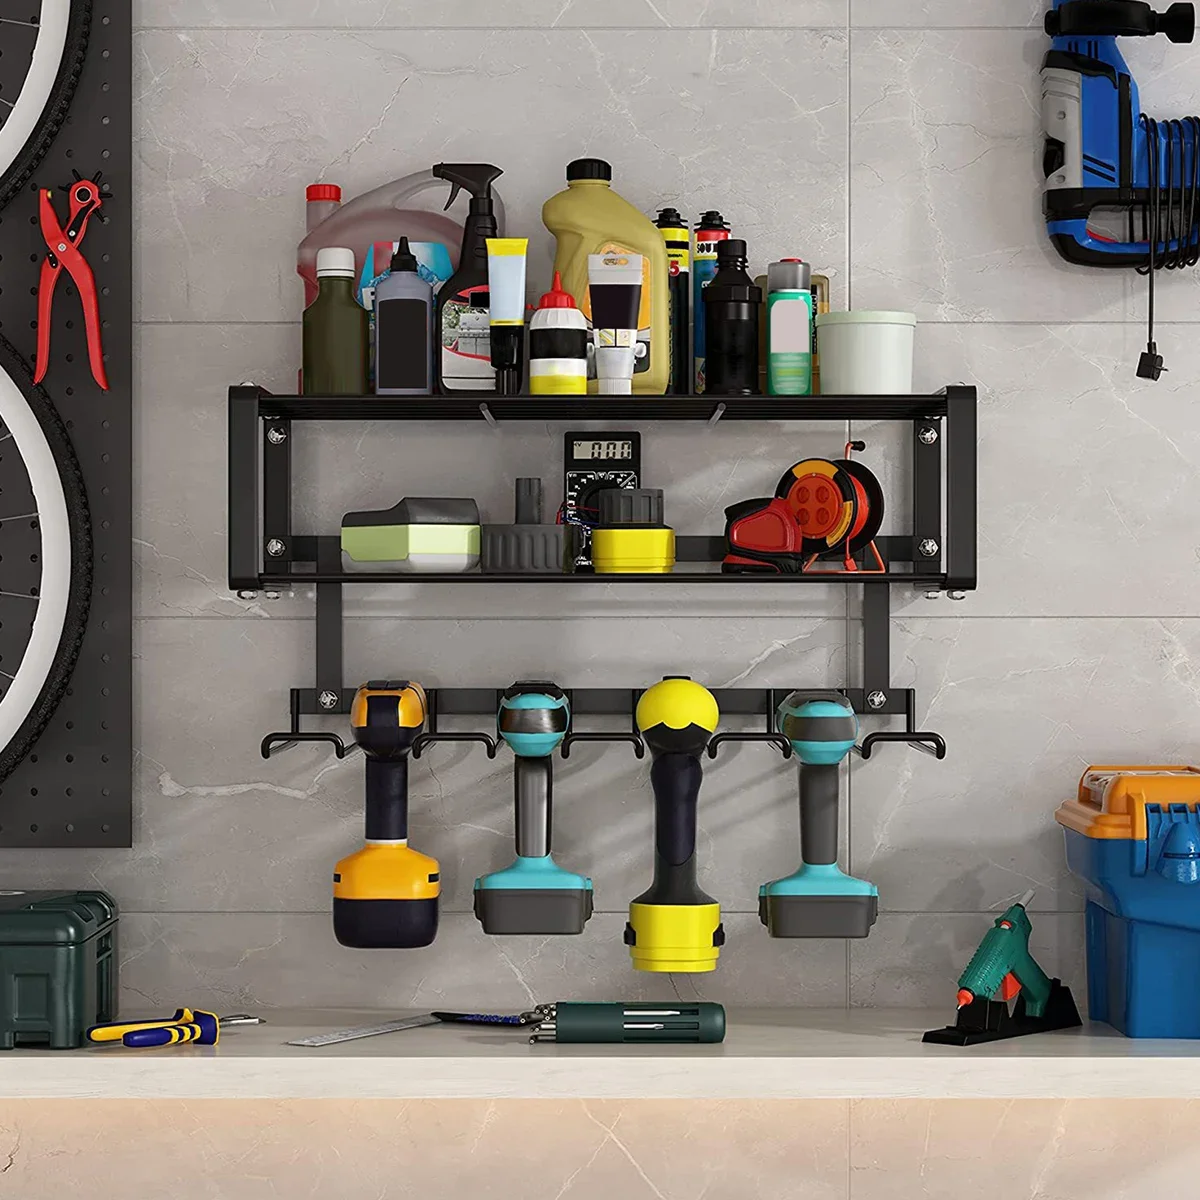 Tool Holders and Organizers